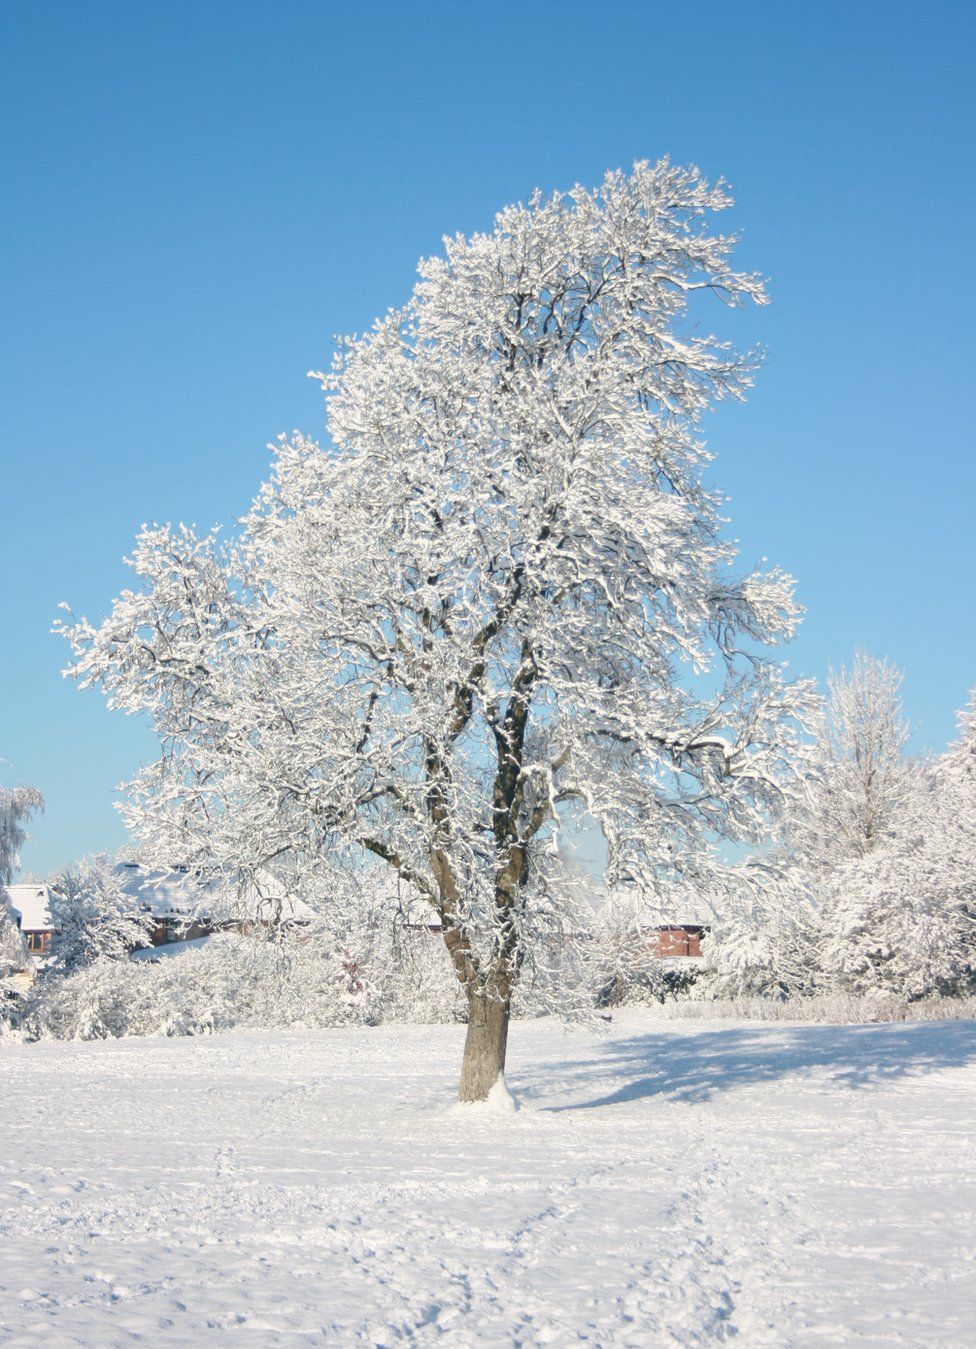 A snow covered tree